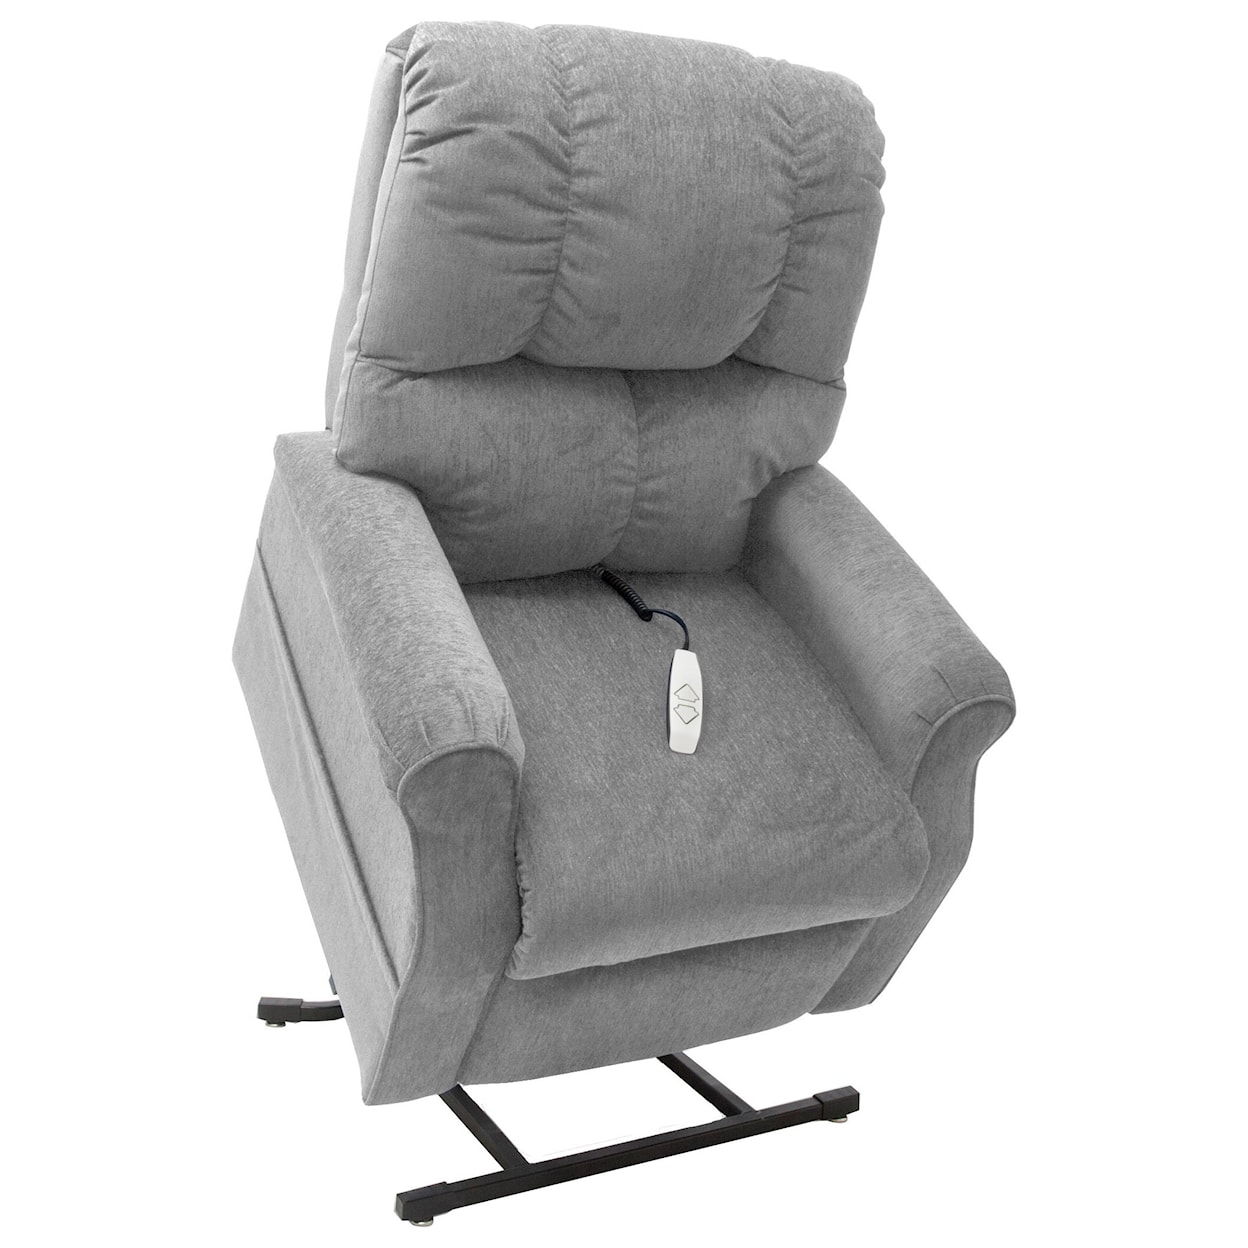 Windermere Motion Lift Chairs Celestial Chaise Lounger